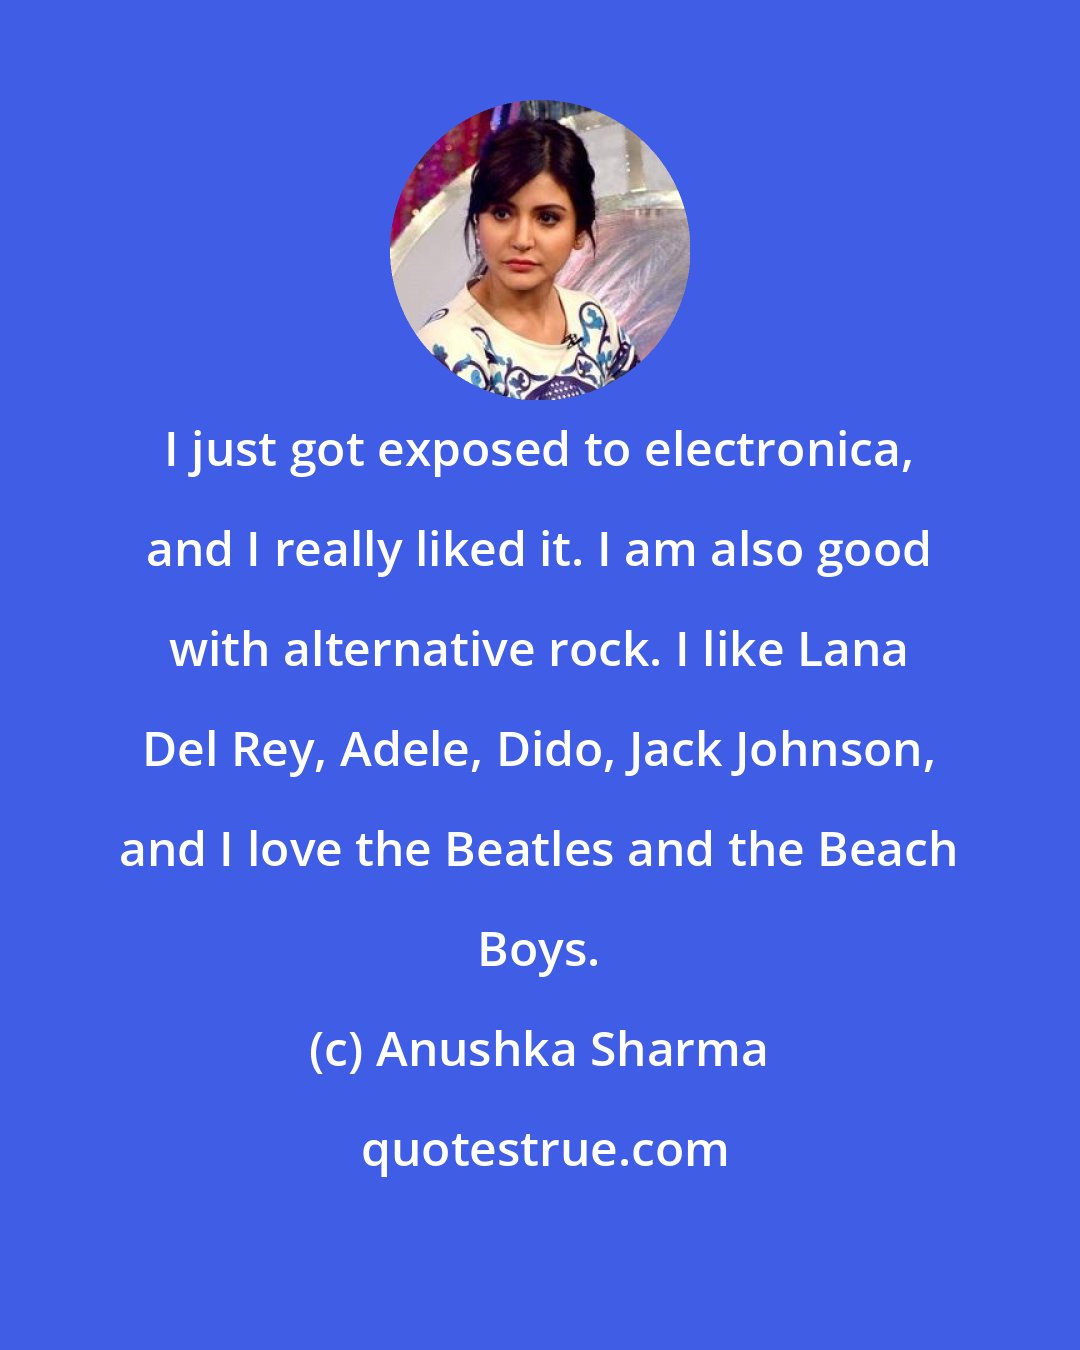 Anushka Sharma: I just got exposed to electronica, and I really liked it. I am also good with alternative rock. I like Lana Del Rey, Adele, Dido, Jack Johnson, and I love the Beatles and the Beach Boys.